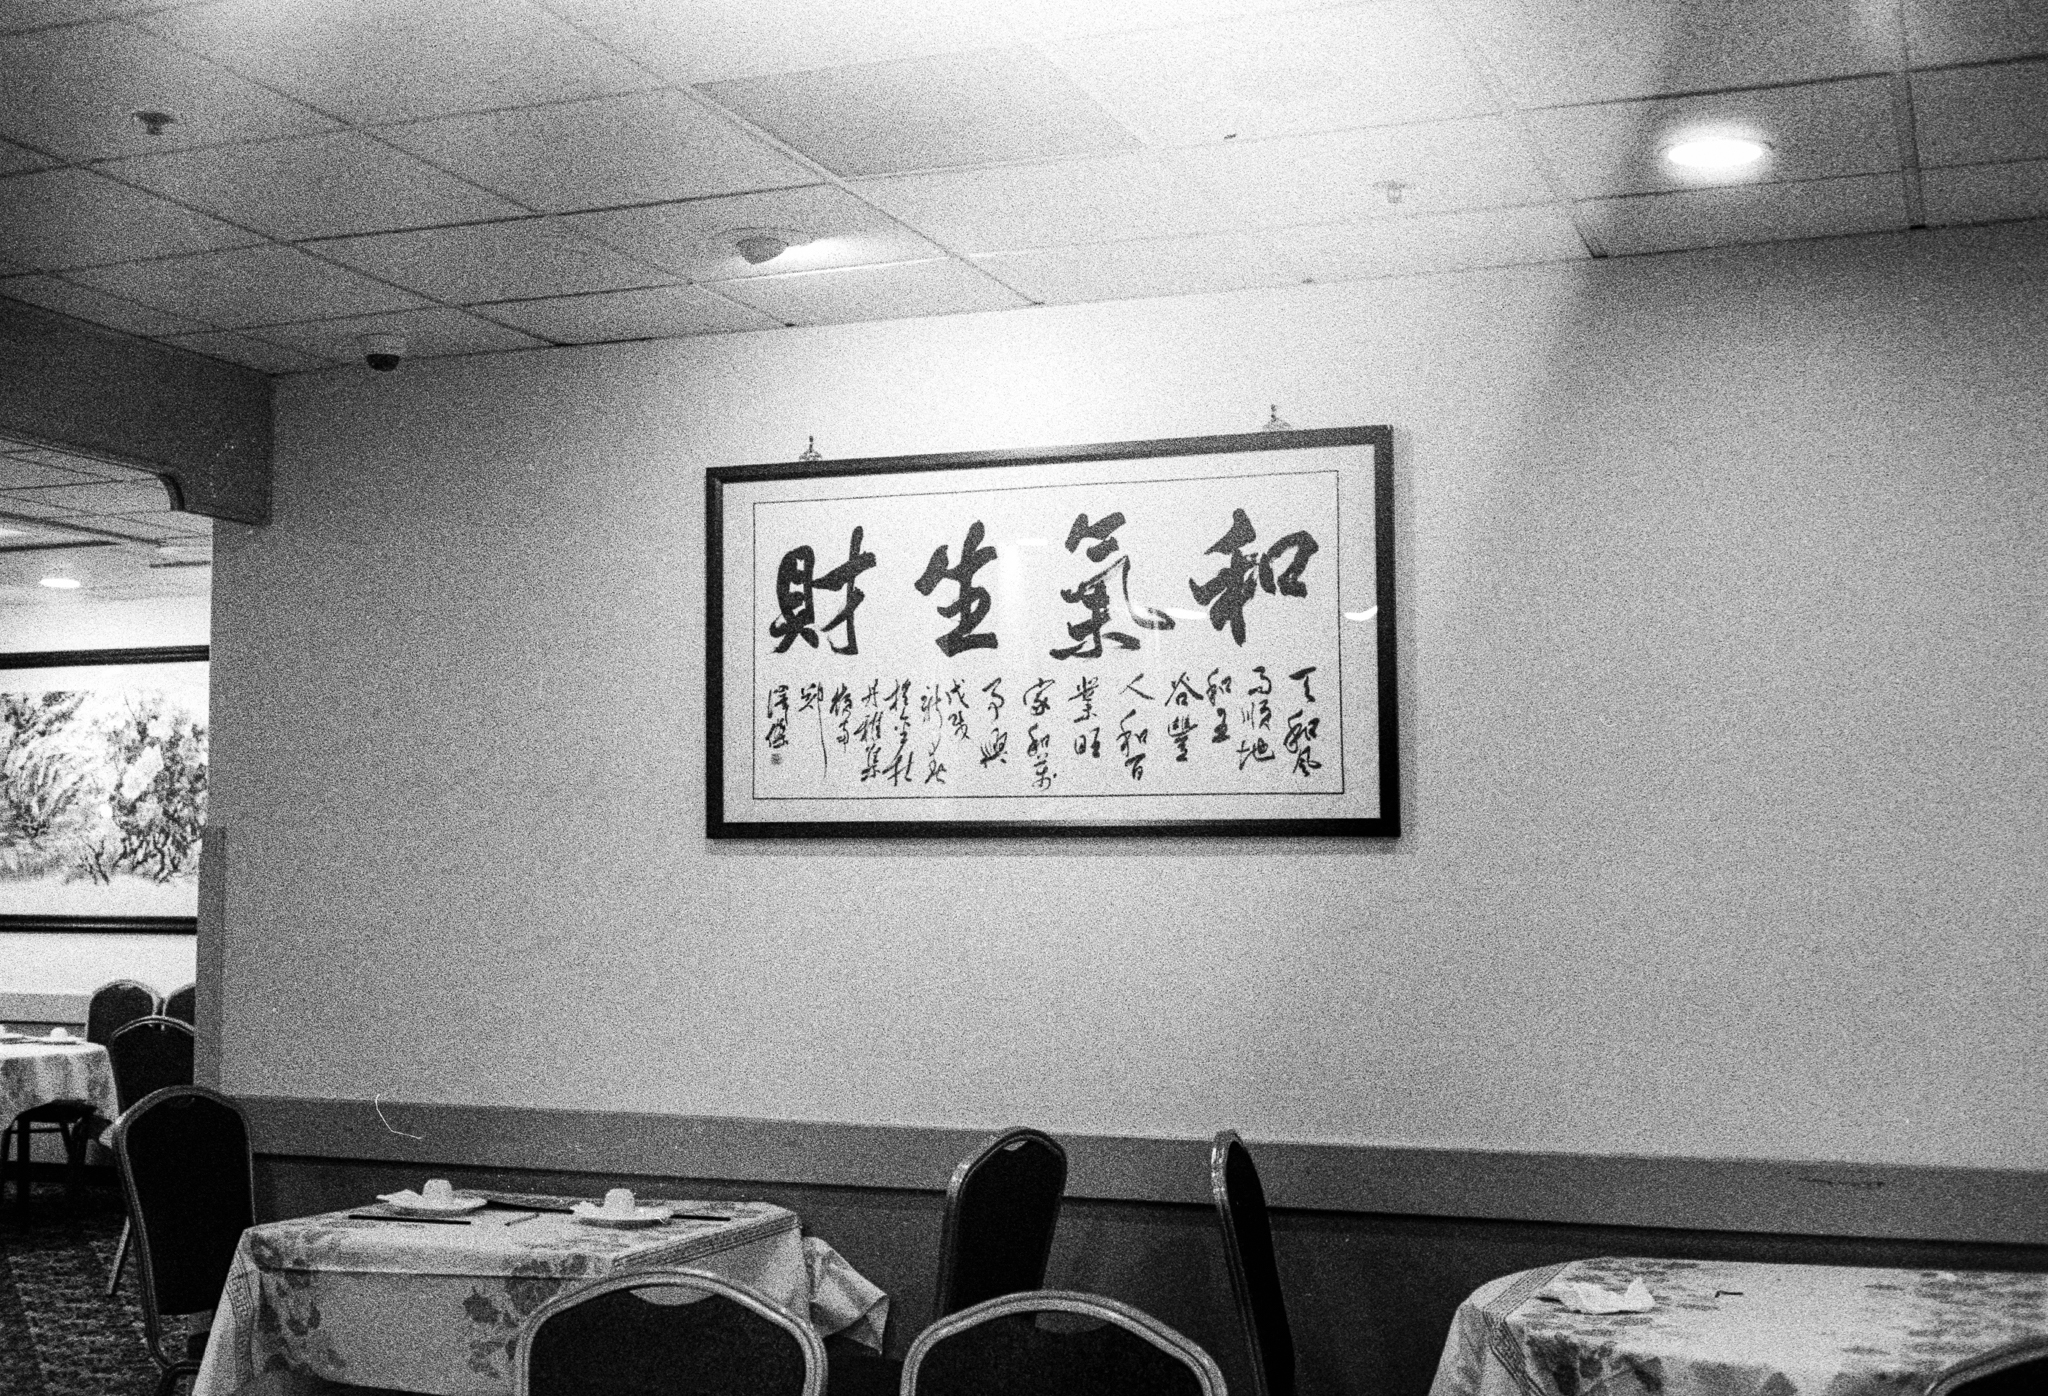 A scan of a black and white photograph of some Chinese calligraphy writing on a wall in a Chinese restaurant in Oakland, California